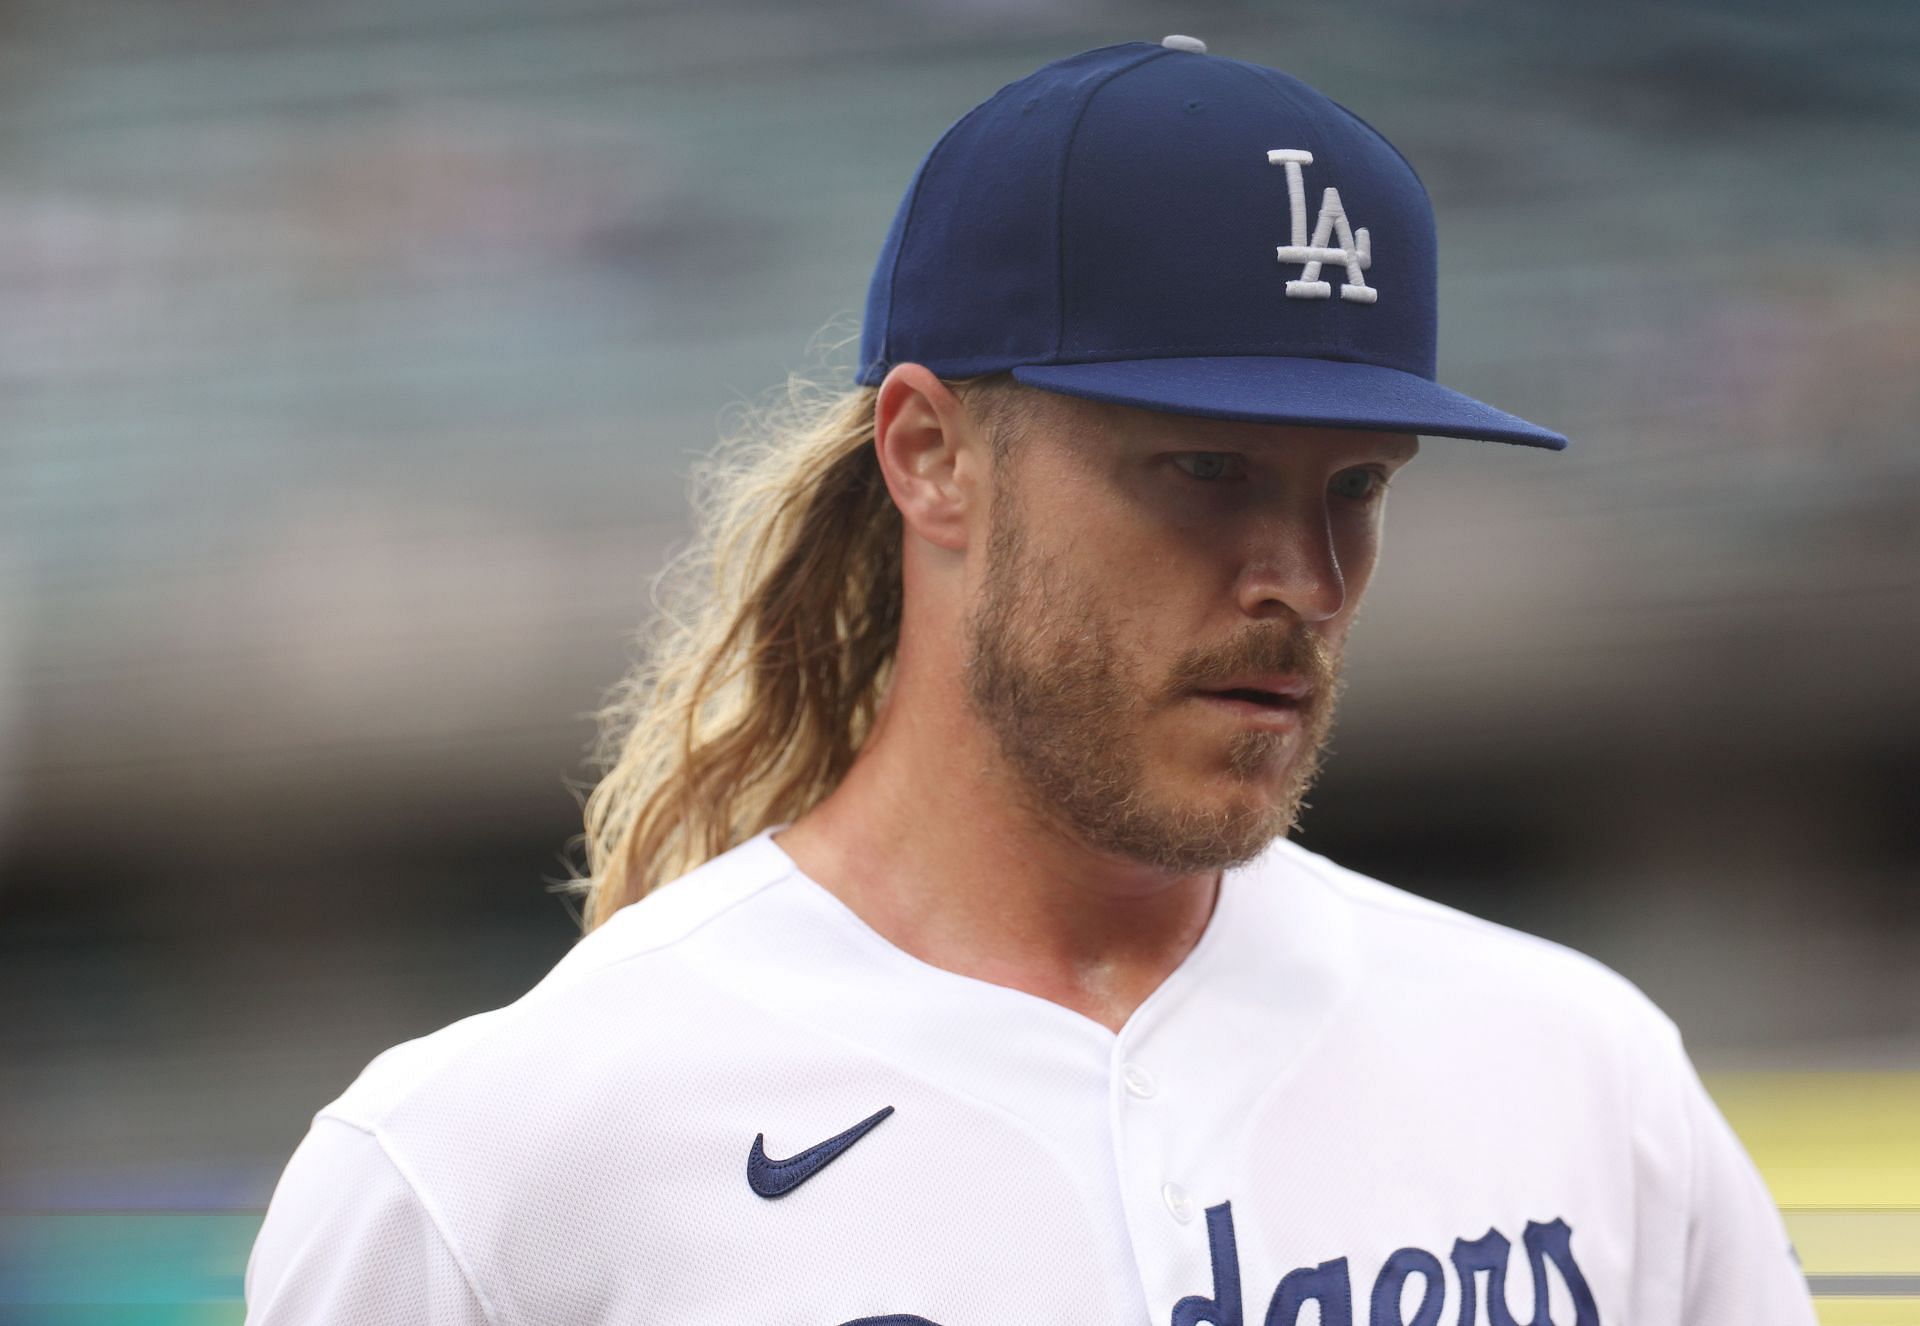 Noah Syndergaard struggles again in Dodgers' loss to Rays